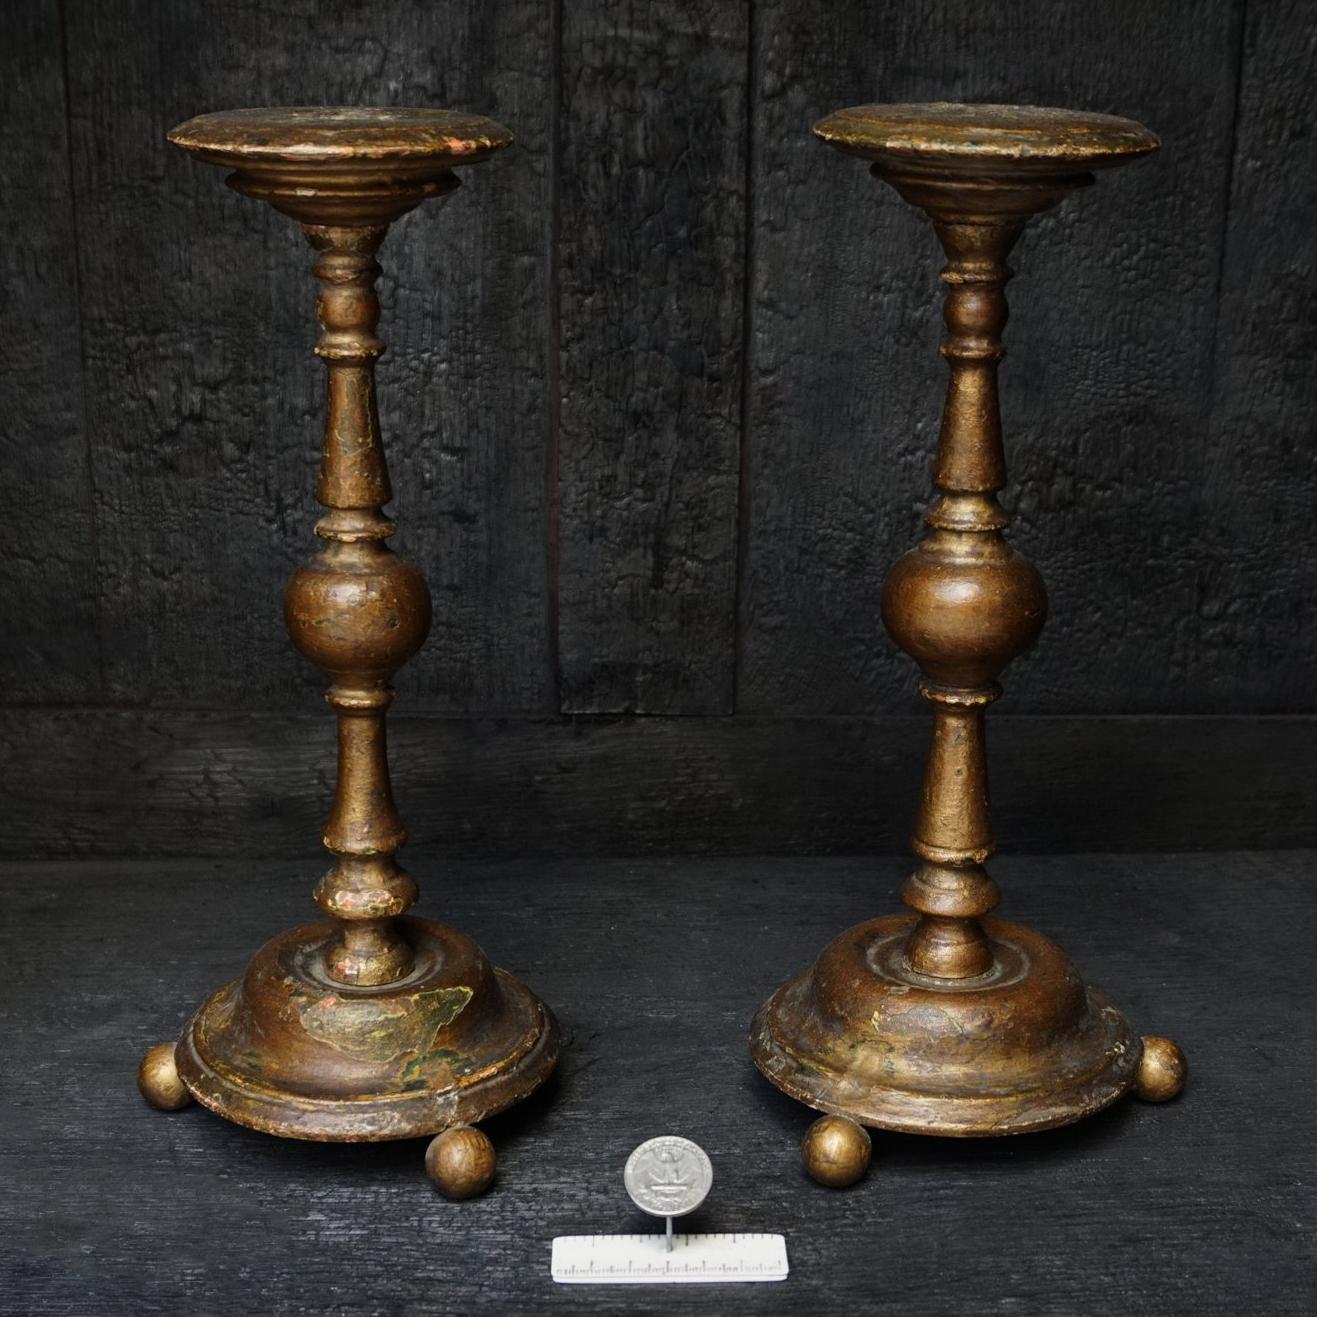 Two Large 18th C. French Polychromed Bois Doré or Gold Painted Wood Candlesticks For Sale 4